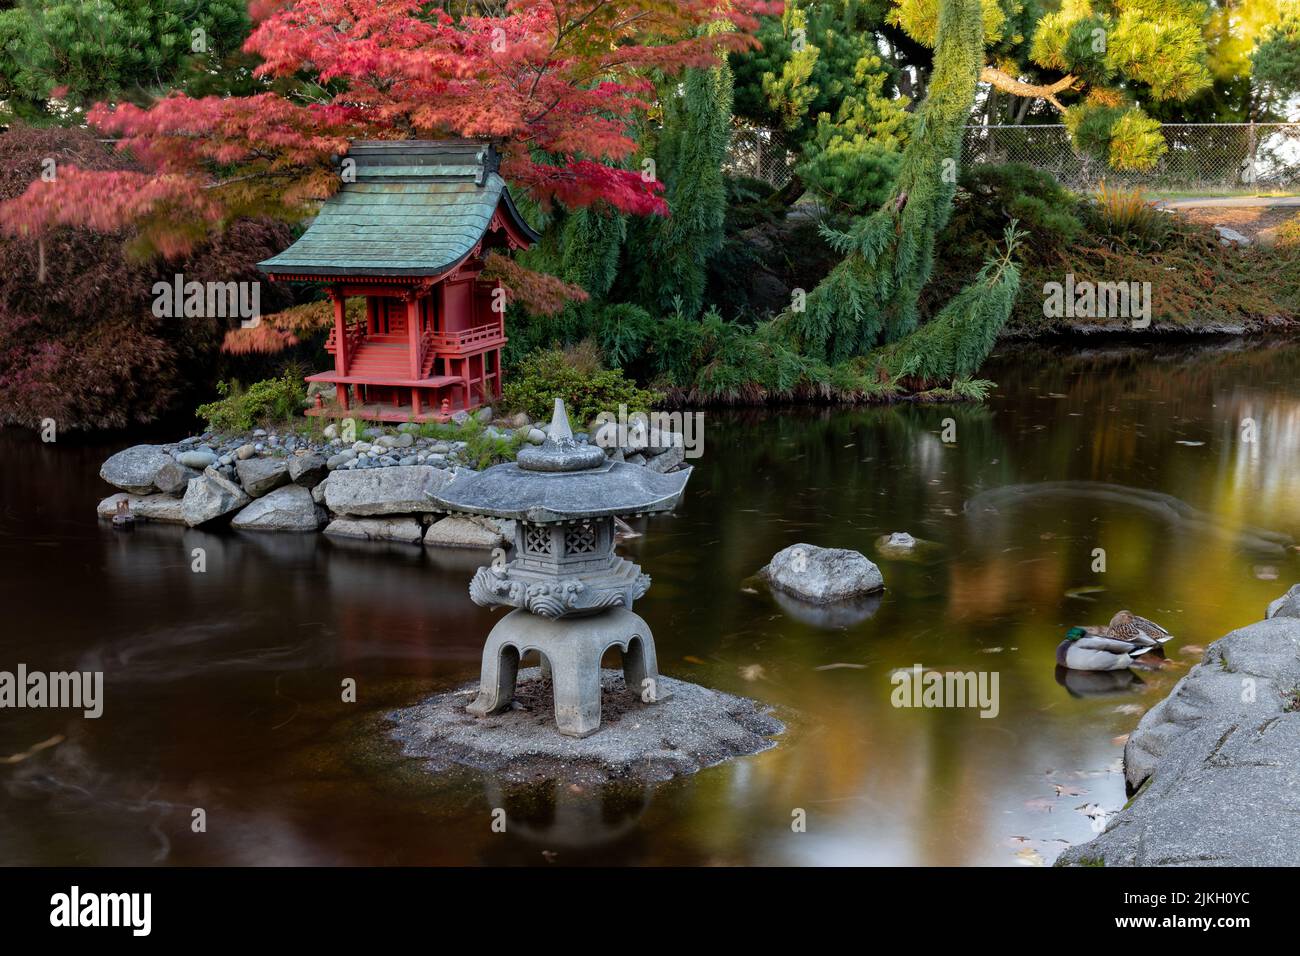 Japanese Garden Pond with Red Pagoda in Point Defiance Park, Tacoma, WA Stock Photo